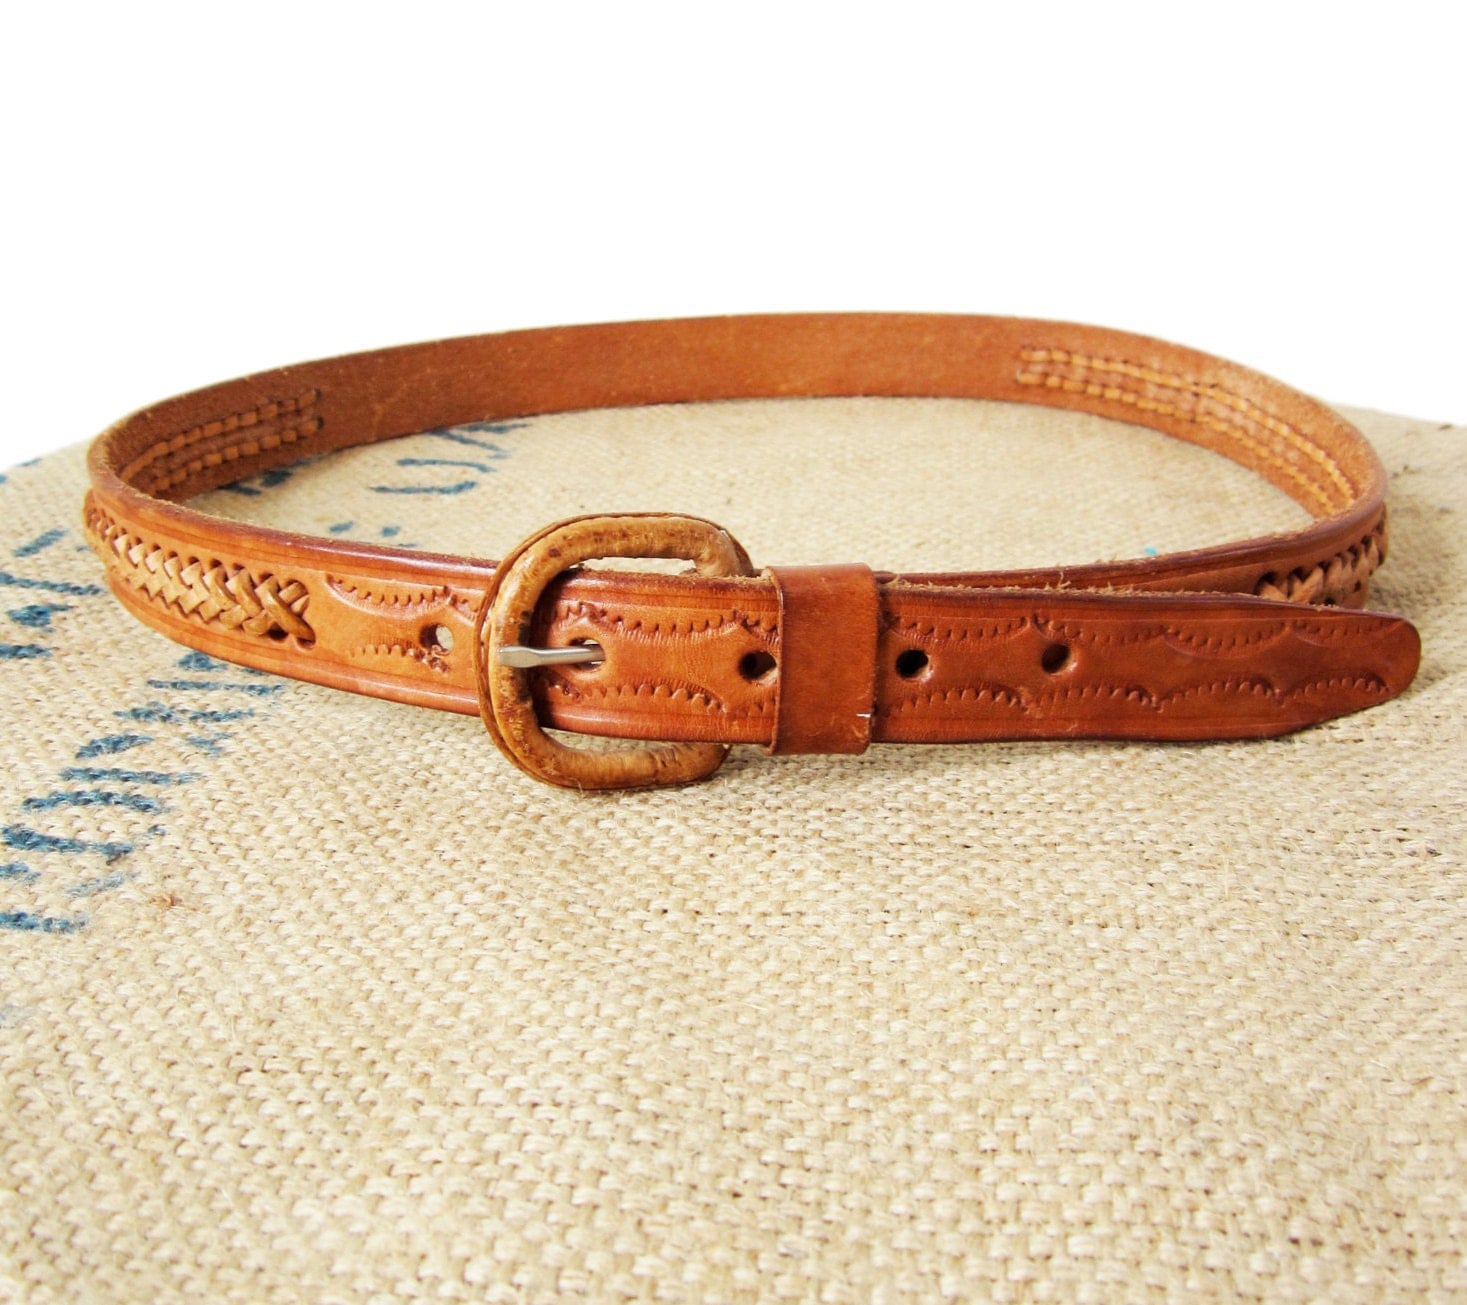 Vintage Mexican Leather Belt Woven Laced and by MemoryVintage